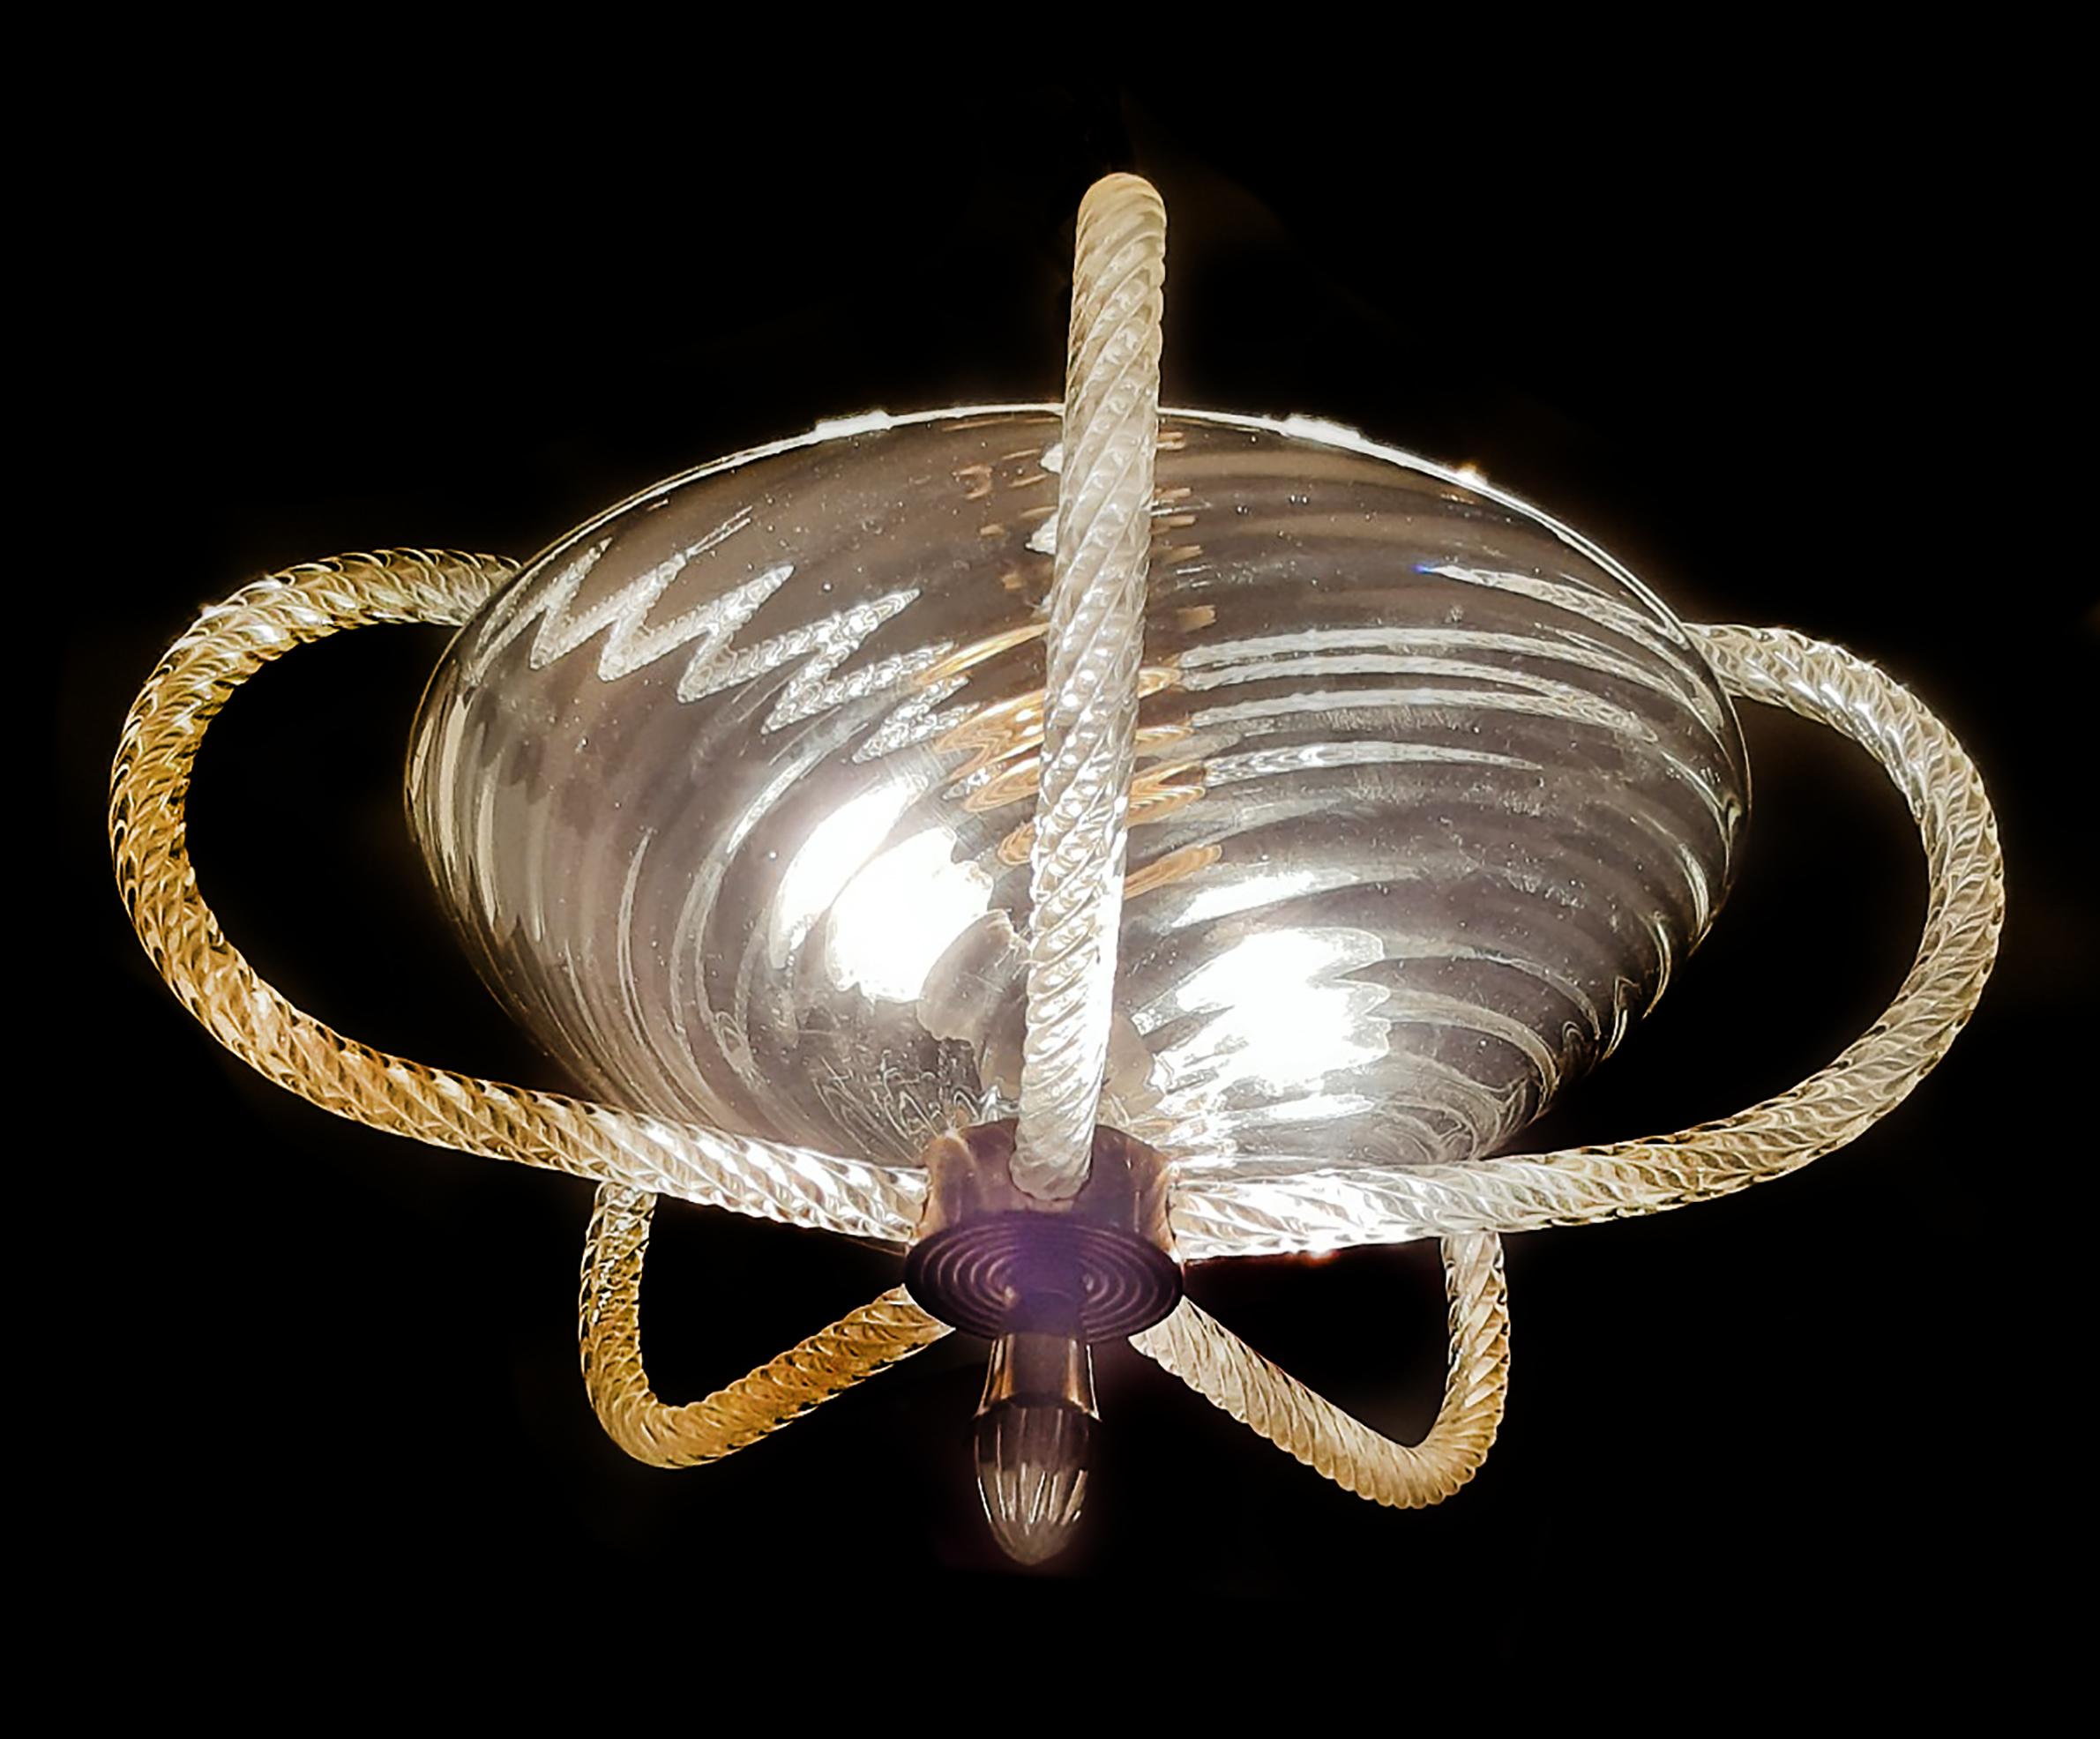 Mid-20th Century Art Deco Chandelier by Ercole Barovier, Murano, 1940 For Sale